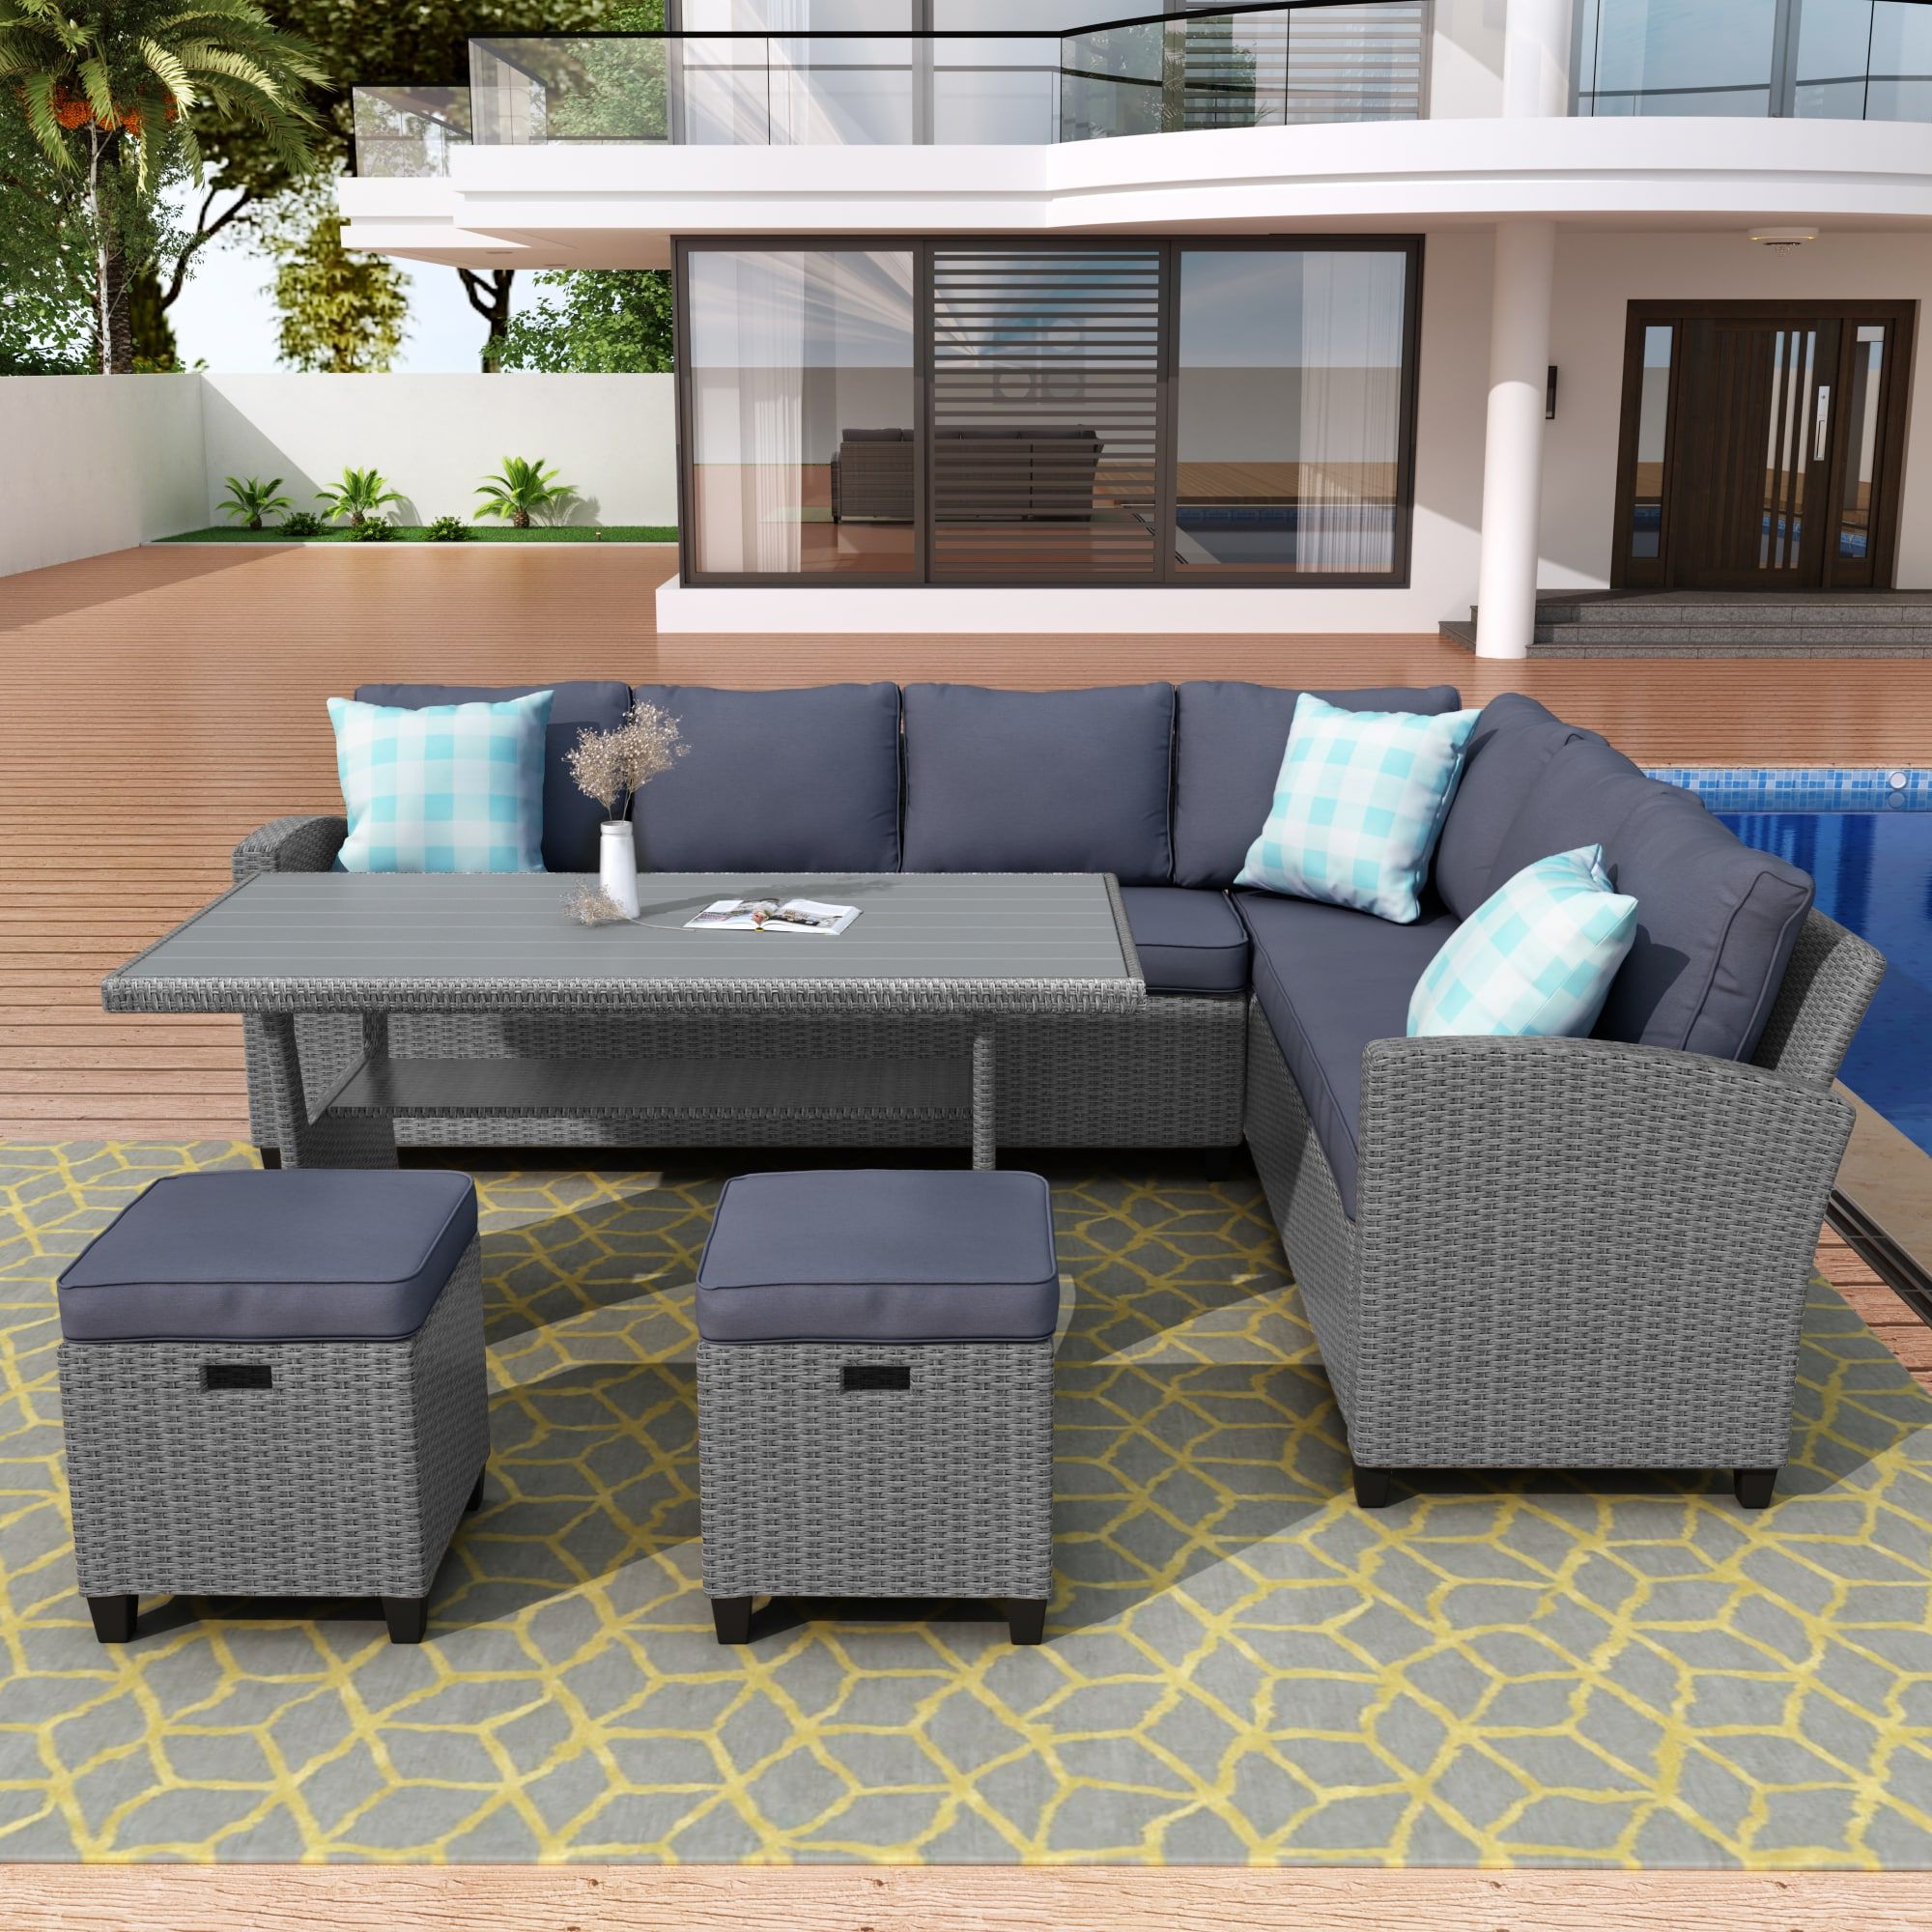 5 Piece Patio Conversation Set With Regard To Most Up To Date Clihome 5 Piece Patio Conversation Set 5 Piece Rattan Patio Conversation Set  With Gray Cushions In The Patio Conversation Sets Department At Lowes (View 7 of 15)